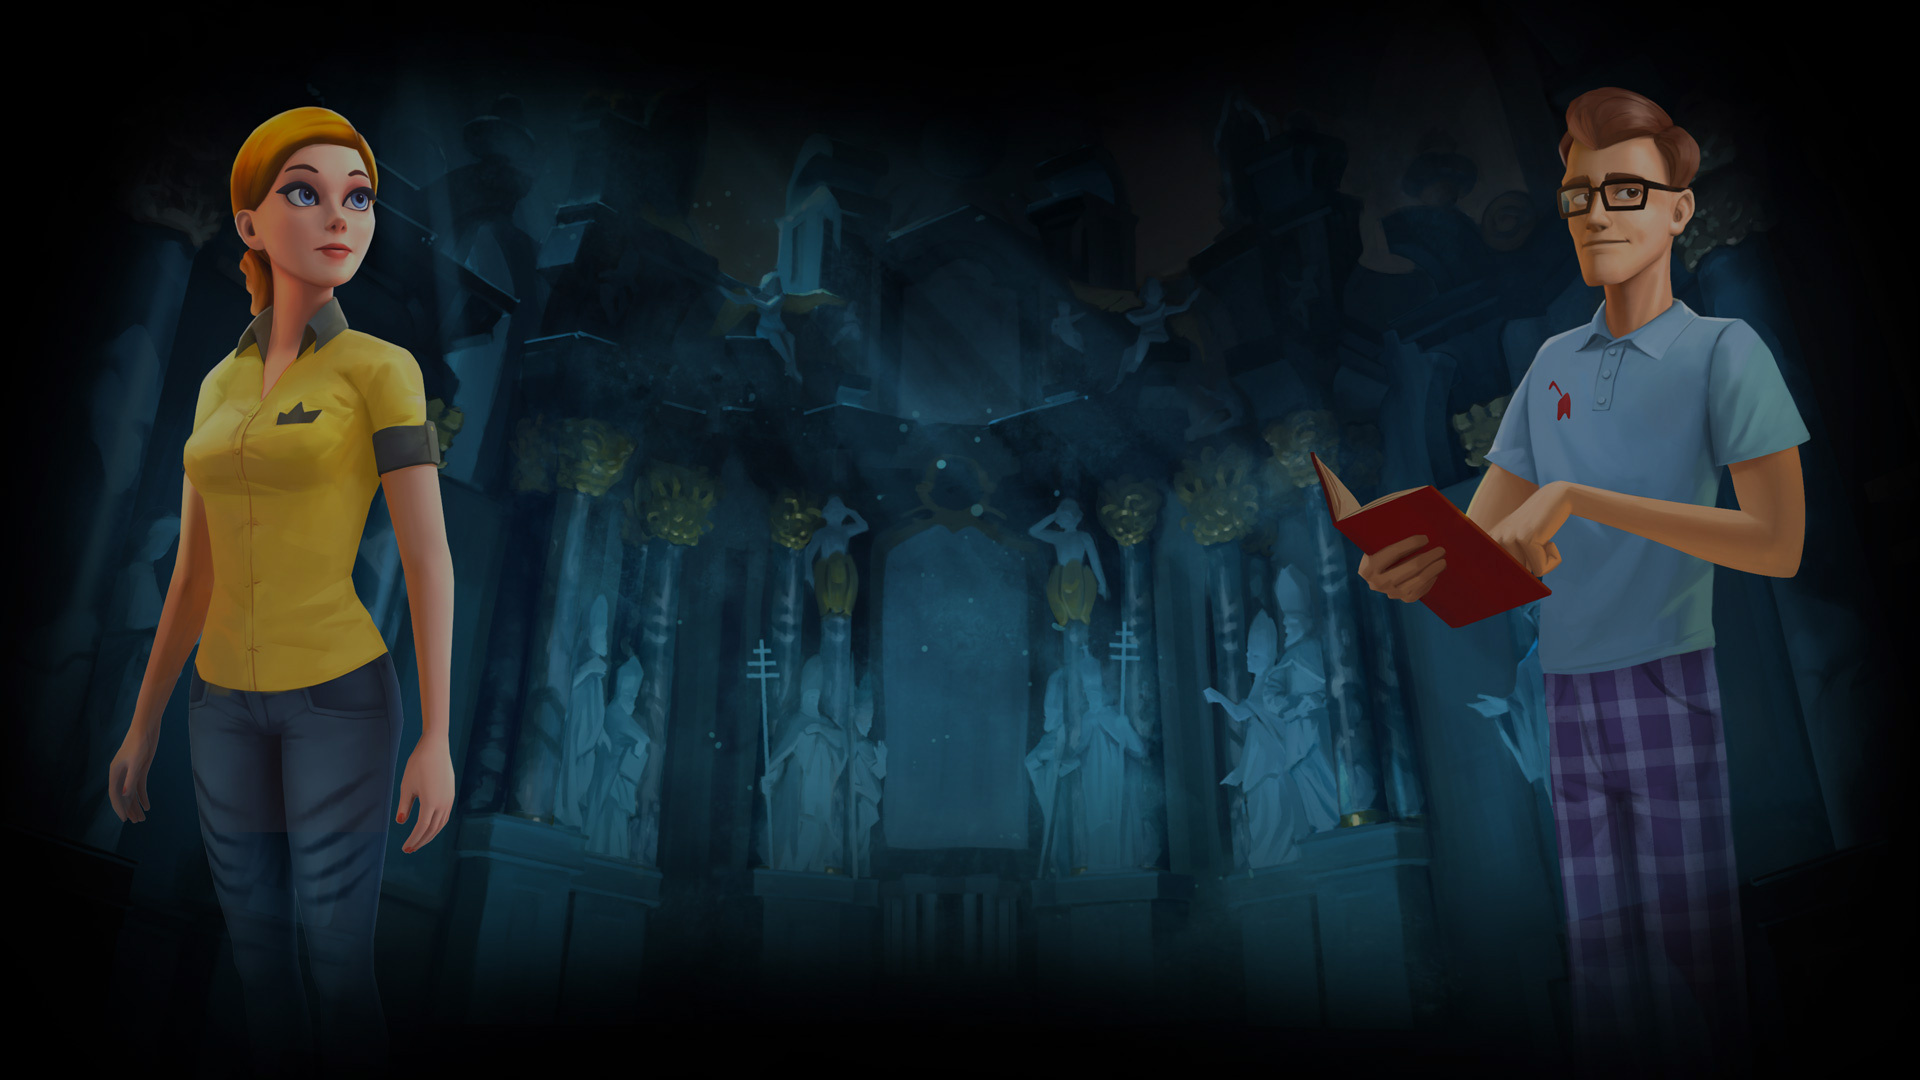 Crowns and Pawns: Kingdom of Deceit: Inspired by Broken Sword, Playing as Milda, Joris. 1920x1080 Full HD Background.